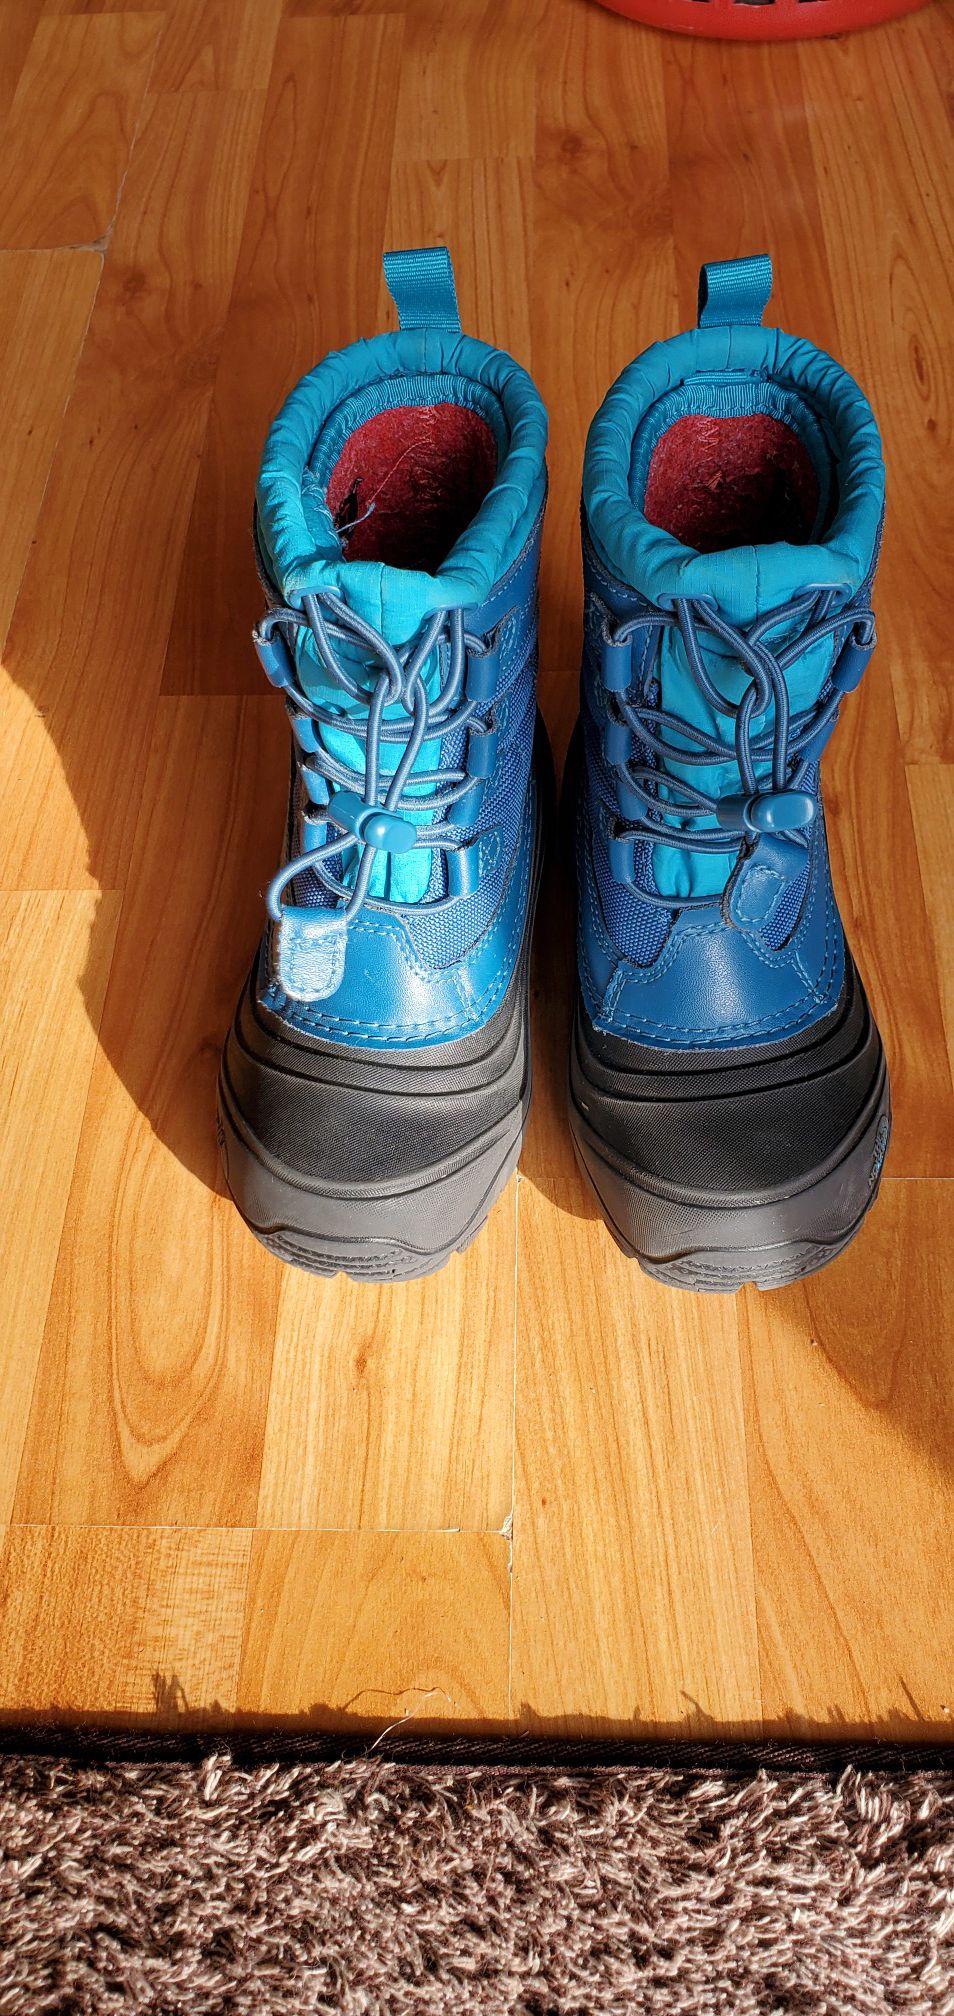 The North Face girls size 12 winter boots